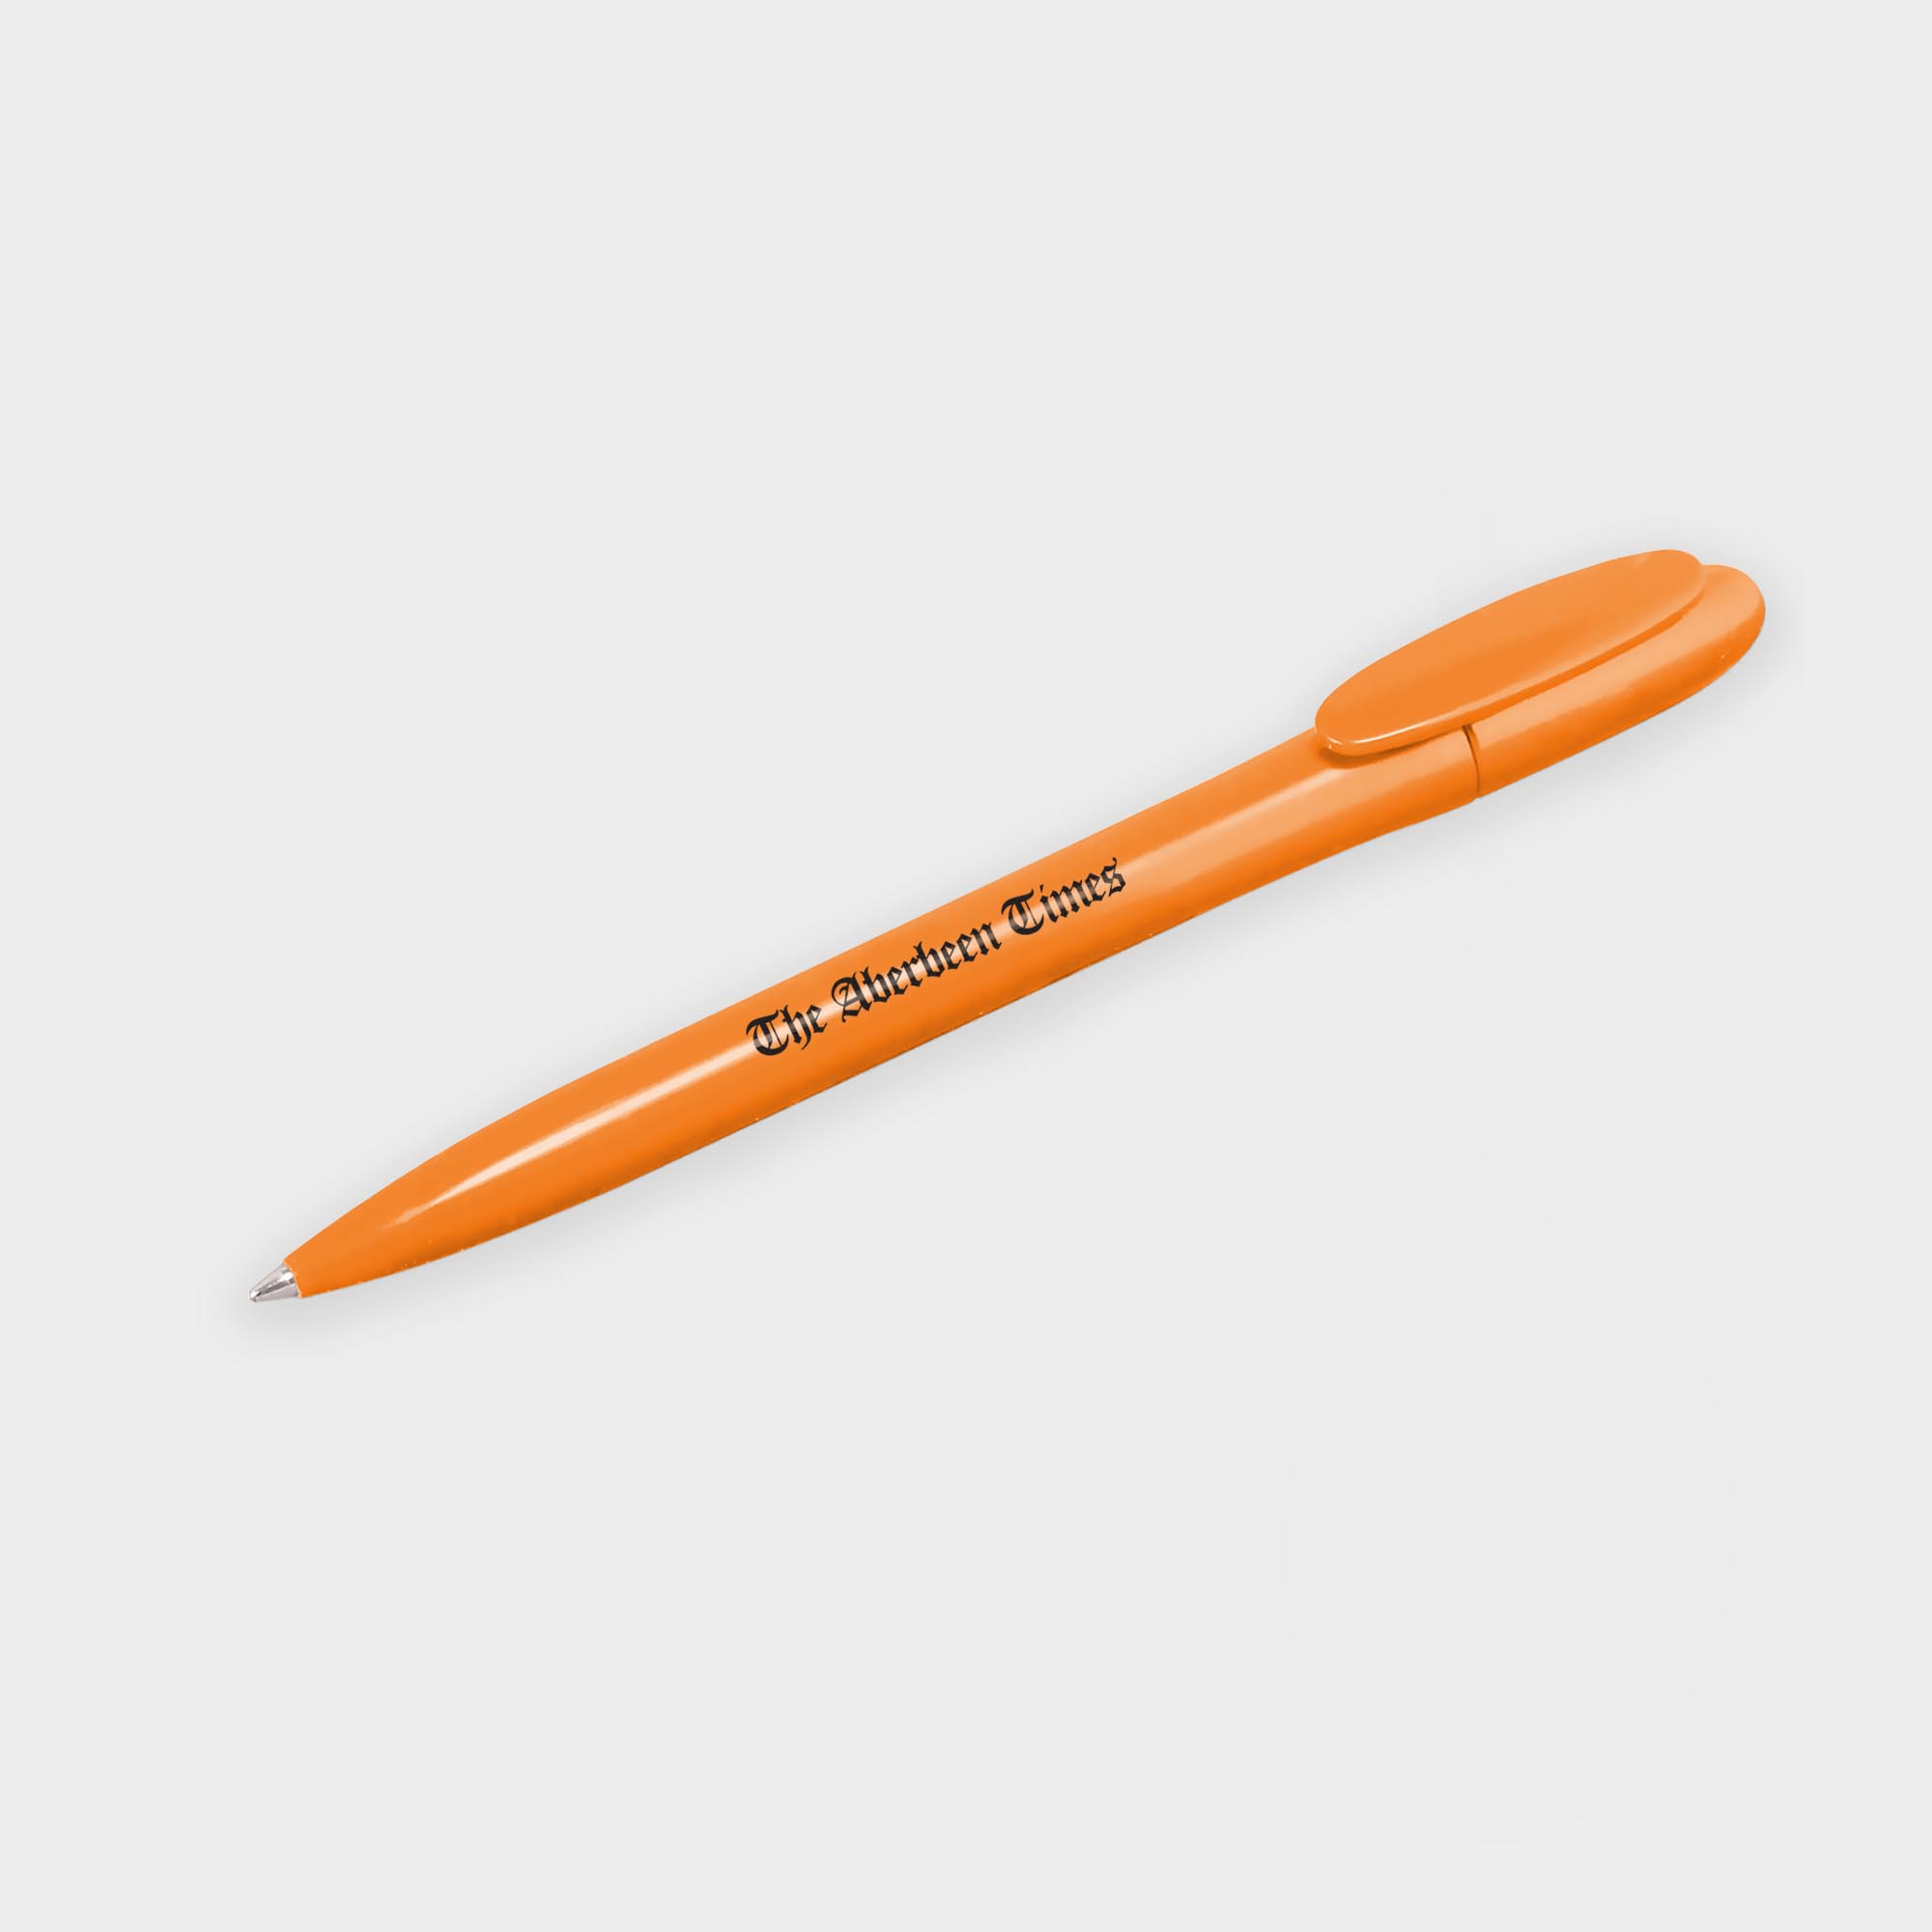 The Green & Good Realta ballpen. It is made in the EU from recycled plastic. Available in a variety of colours with a twist action mechanism. Comes with black ink as standard. One of our bestsellers. Orange